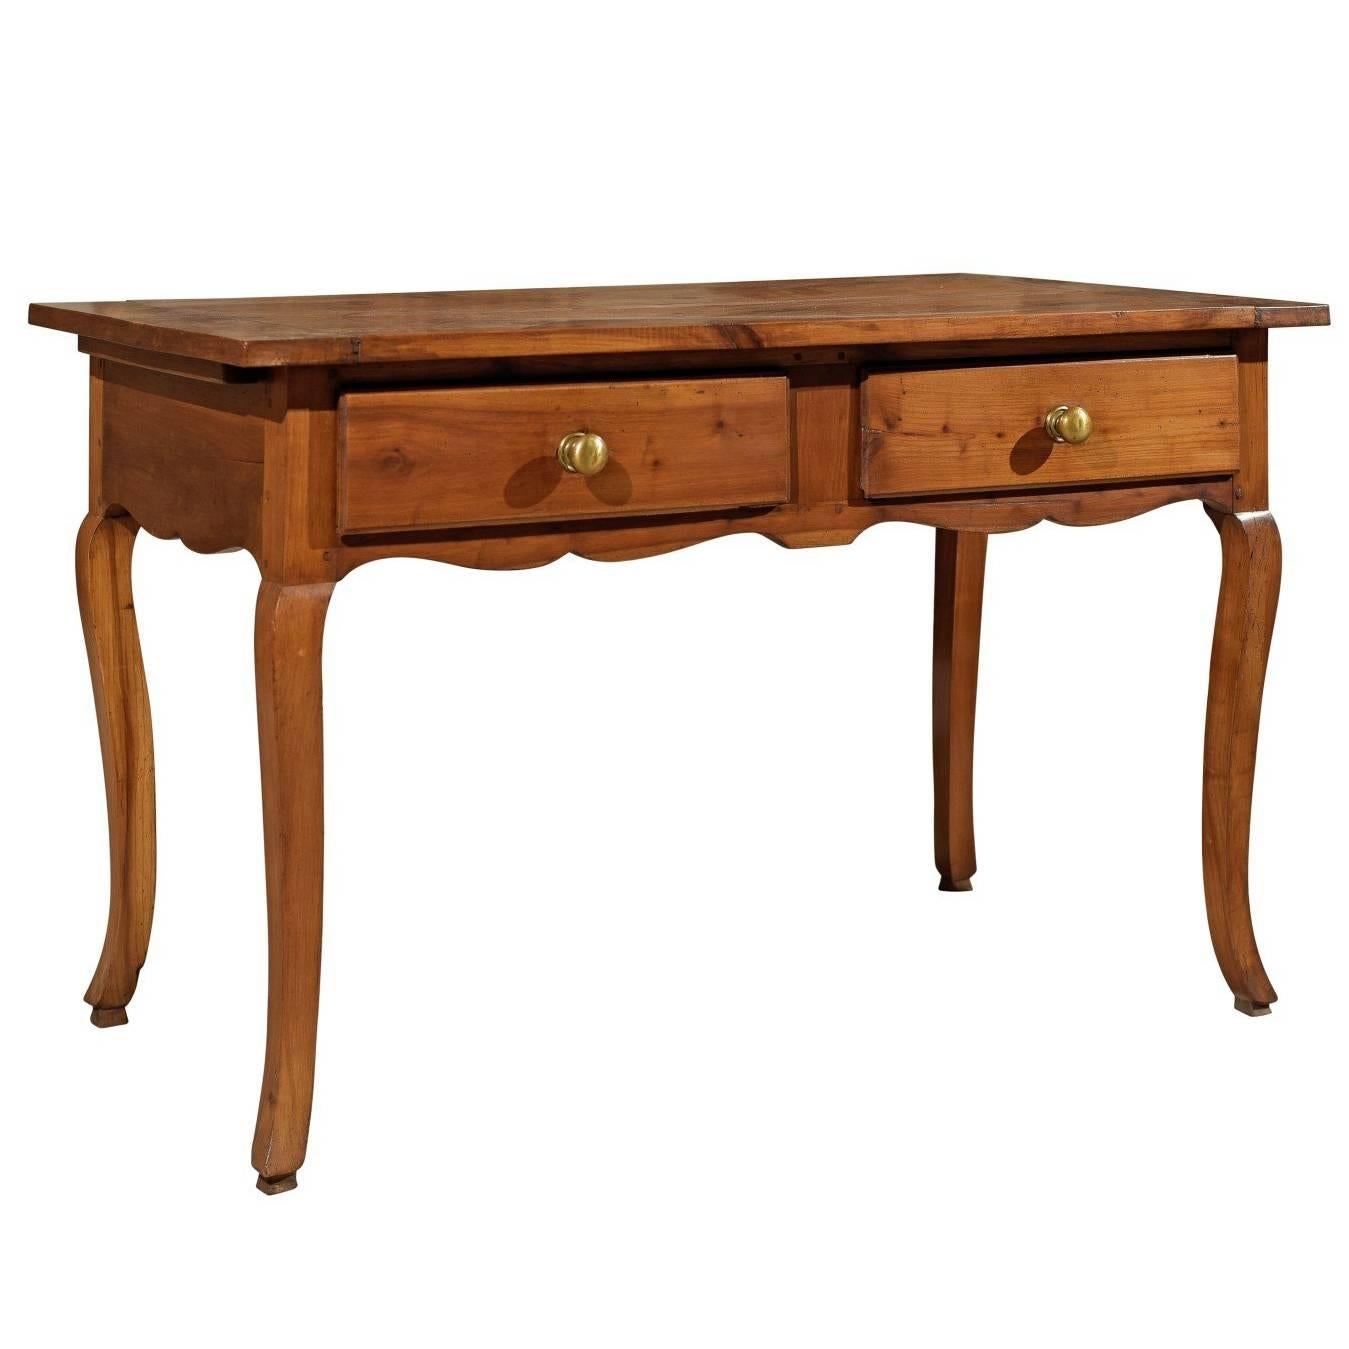 19th Century Cherry Louis XV Style Table with Two Drawers, circa 1820 For Sale